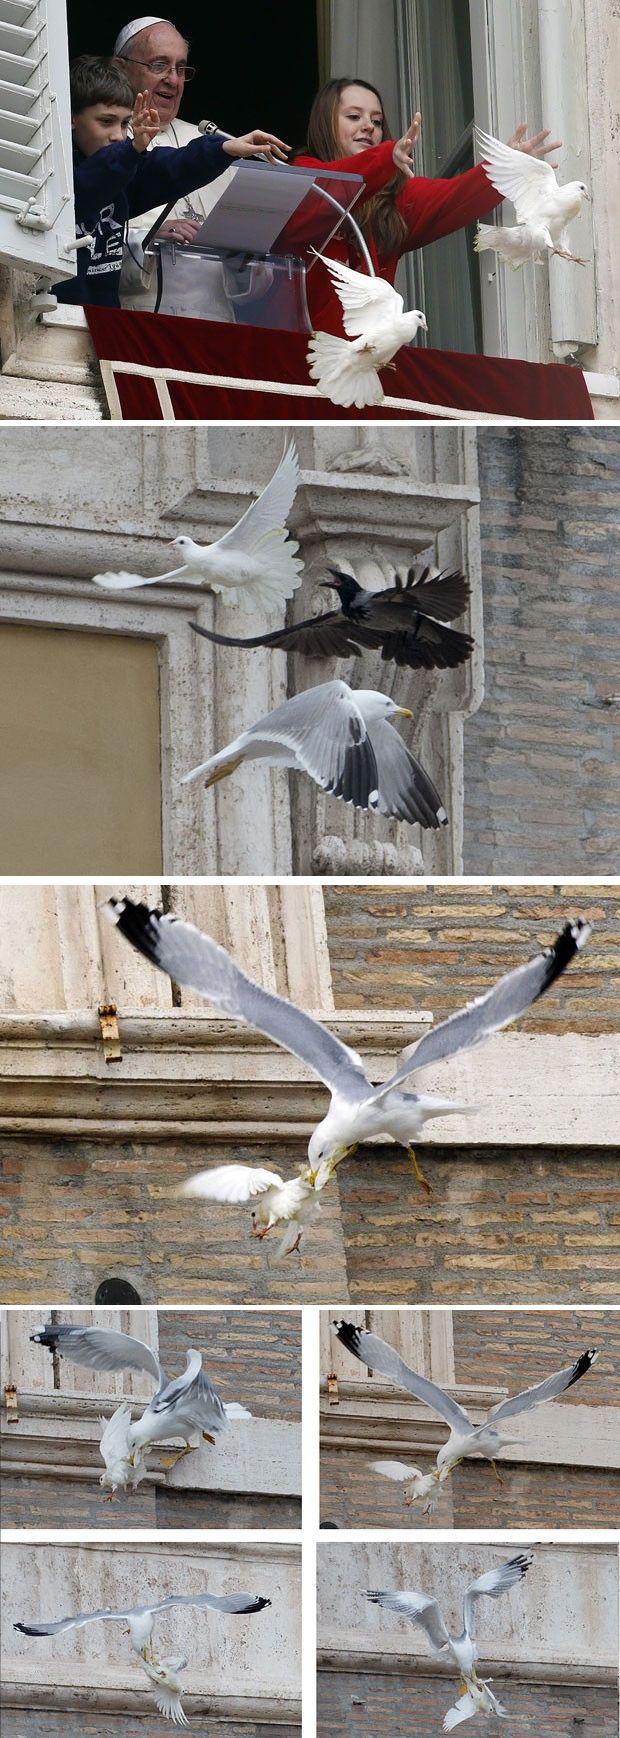 Popes Dove of Peace Attacked by Seagull Again